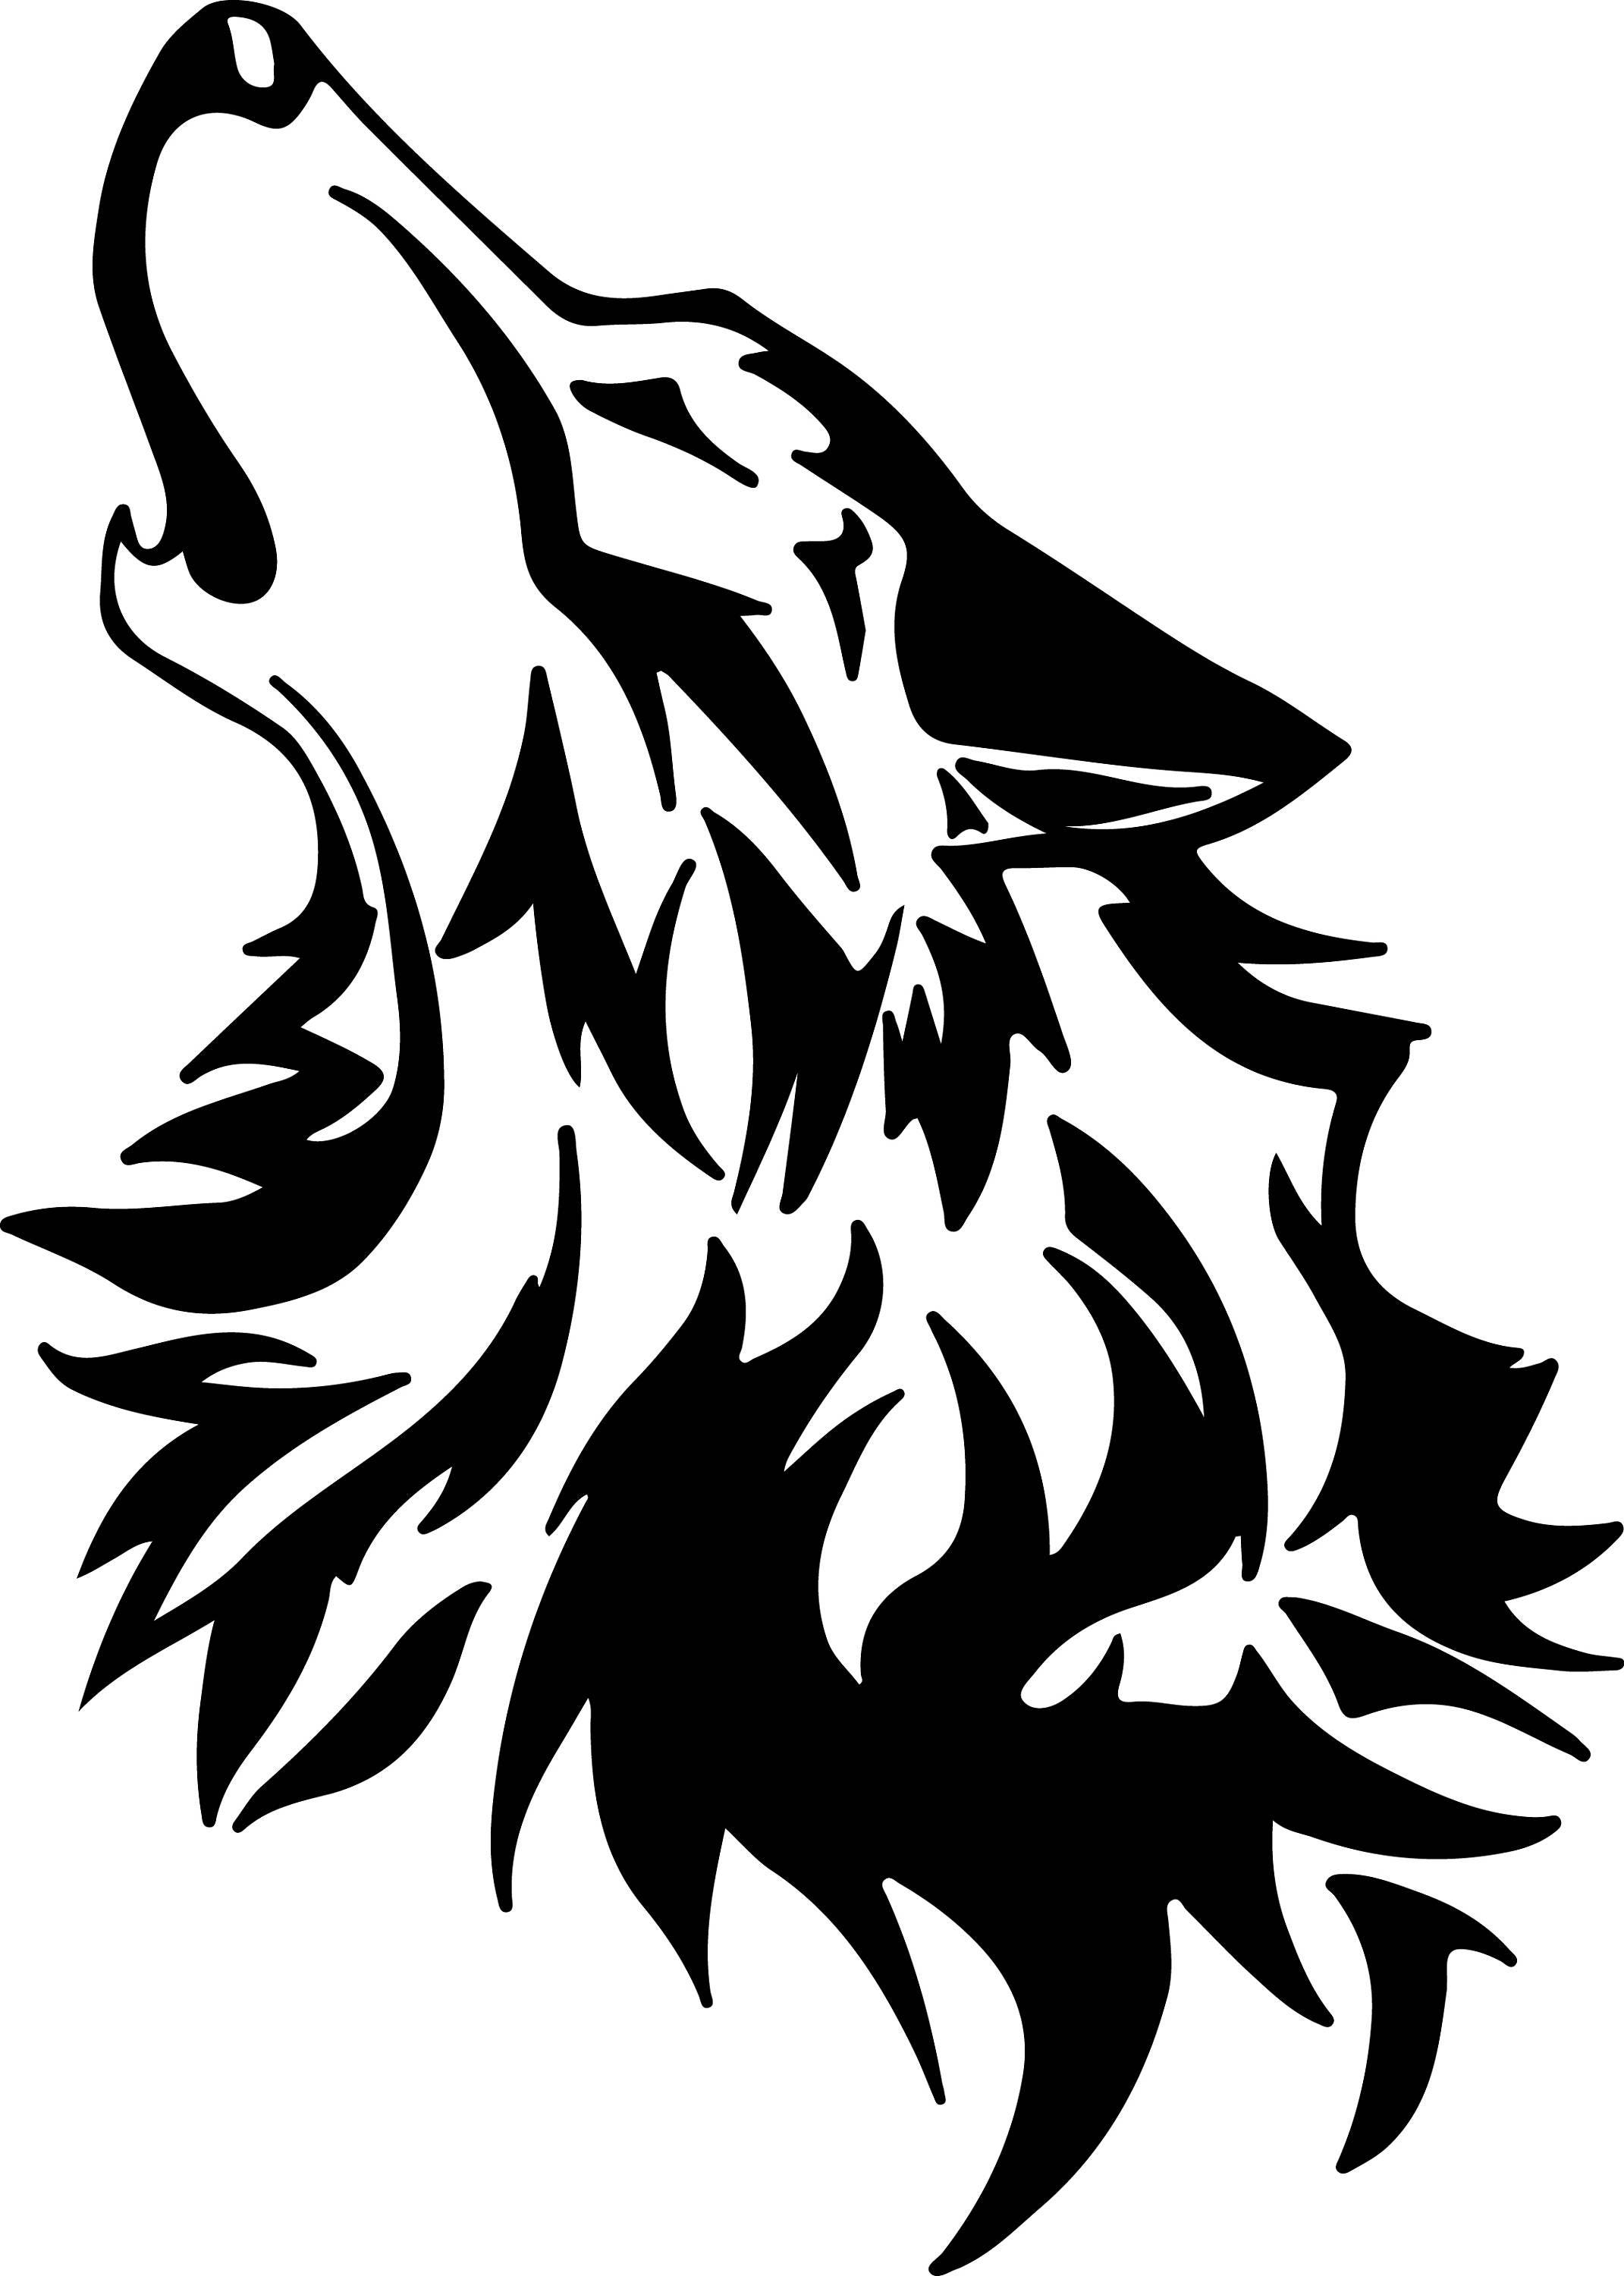 Wolf Svg Files Silhouettes Dxf Files Cutting files Cricut for Cricut.